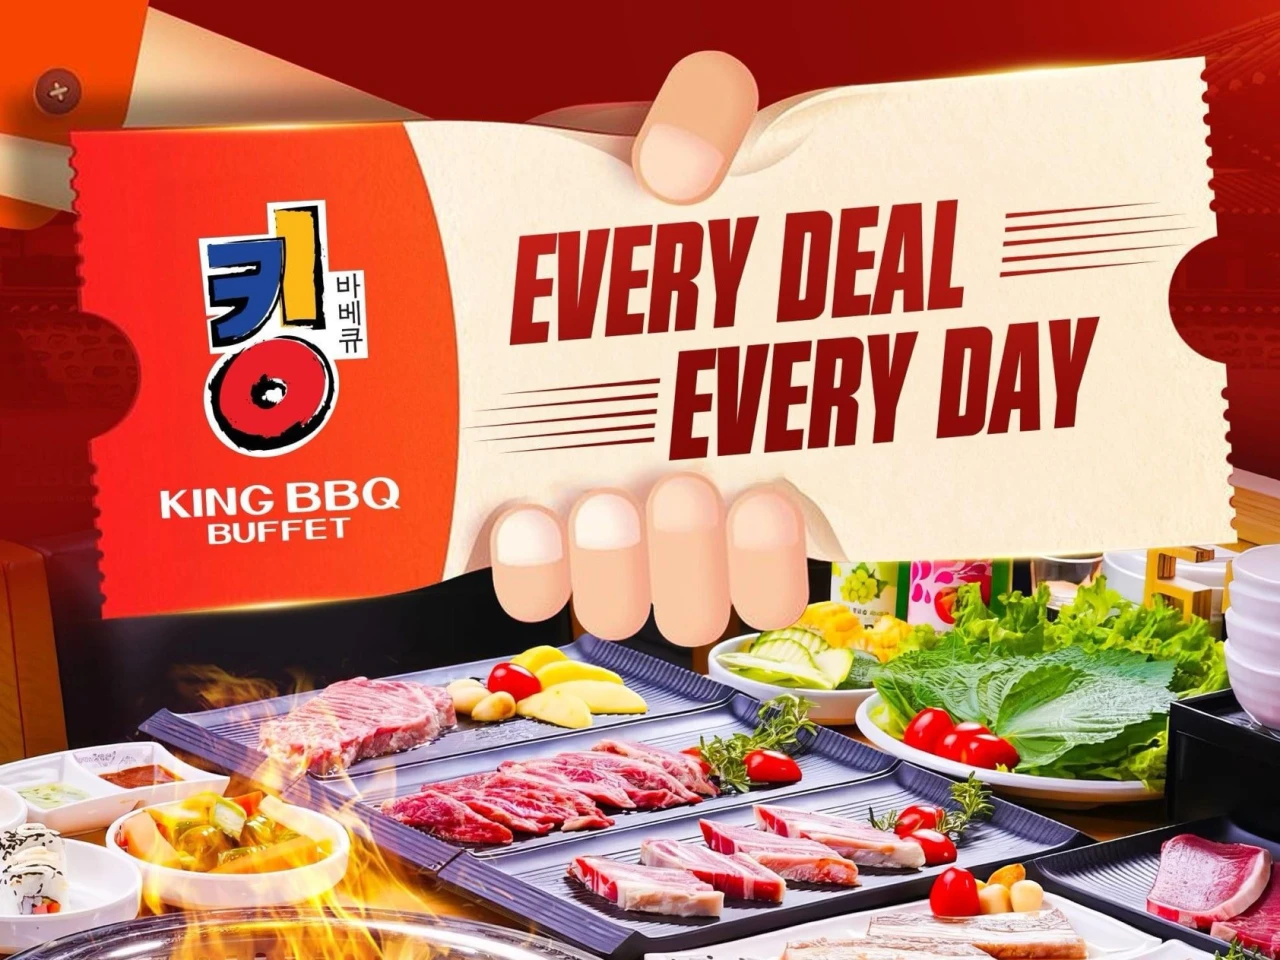 EVERYDAY DEAL - EVERY DAY CÙNG KING BBQ